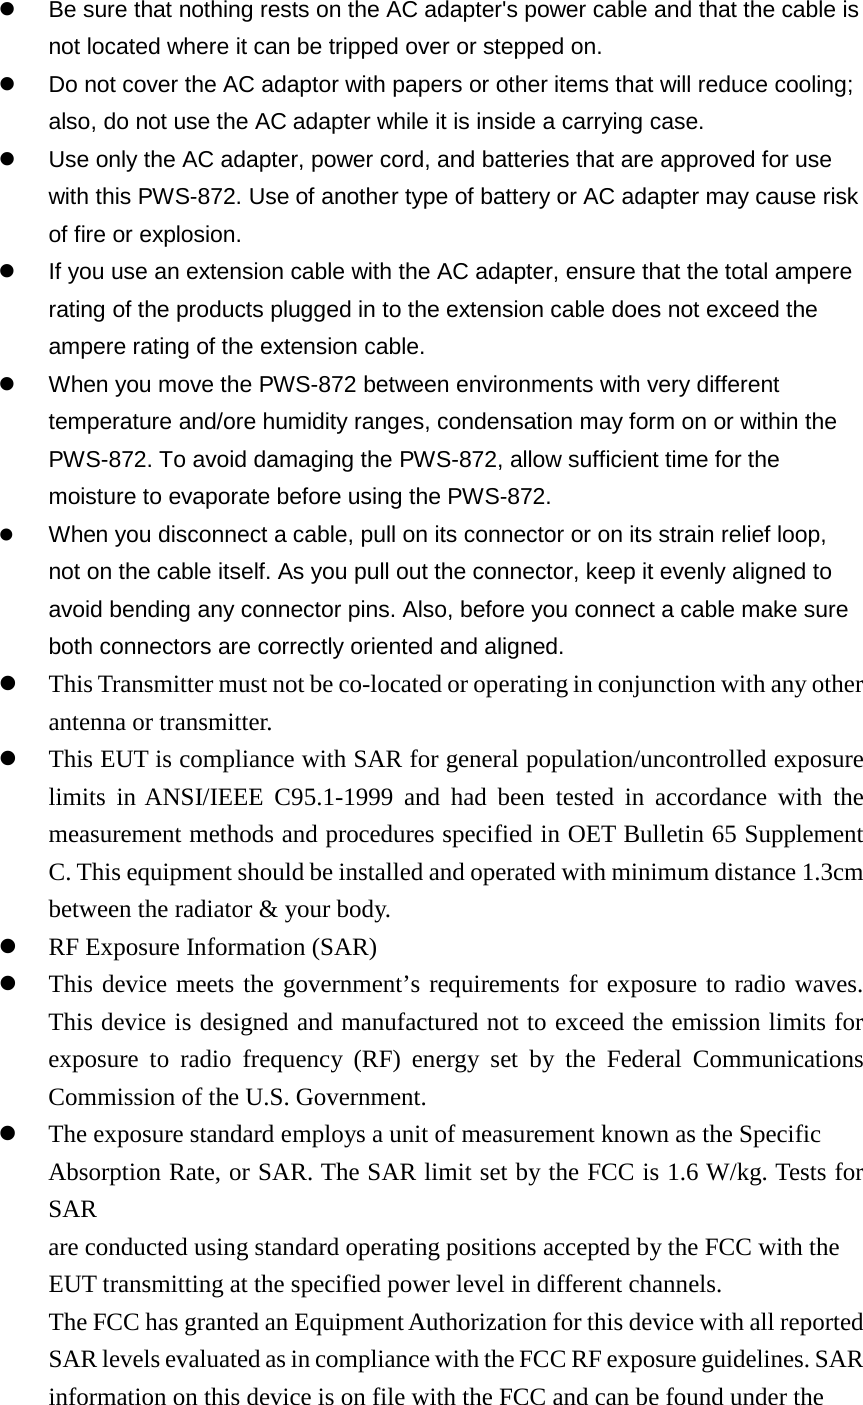  Be sure that nothing rests on the AC adapter&apos;s power cable and that the cable is not located where it can be tripped over or stepped on.  Do not cover the AC adaptor with papers or other items that will reduce cooling; also, do not use the AC adapter while it is inside a carrying case.  Use only the AC adapter, power cord, and batteries that are approved for use with this PWS-872. Use of another type of battery or AC adapter may cause risk of fire or explosion.  If you use an extension cable with the AC adapter, ensure that the total ampere rating of the products plugged in to the extension cable does not exceed the ampere rating of the extension cable.  When you move the PWS-872 between environments with very different temperature and/ore humidity ranges, condensation may form on or within the PWS-872. To avoid damaging the PWS-872, allow sufficient time for the moisture to evaporate before using the PWS-872.  When you disconnect a cable, pull on its connector or on its strain relief loop, not on the cable itself. As you pull out the connector, keep it evenly aligned to avoid bending any connector pins. Also, before you connect a cable make sure both connectors are correctly oriented and aligned.  This Transmitter must not be co-located or operating in conjunction with any other antenna or transmitter.  This EUT is compliance with SAR for general population/uncontrolled exposure limits in ANSI/IEEE C95.1-1999 and had been tested in accordance with the measurement methods and procedures specified in OET Bulletin 65 Supplement C. This equipment should be installed and operated with minimum distance 1.3cm between the radiator &amp; your body.  RF Exposure Information (SAR)  This device meets the government’s requirements for exposure to radio waves. This device is designed and manufactured not to exceed the emission limits for exposure to radio frequency (RF) energy set by the Federal Communications Commission of the U.S. Government.  The exposure standard employs a unit of measurement known as the Specific Absorption Rate, or SAR. The SAR limit set by the FCC is 1.6 W/kg. Tests for SAR are conducted using standard operating positions accepted by the FCC with the EUT transmitting at the specified power level in different channels. The FCC has granted an Equipment Authorization for this device with all reported SAR levels evaluated as in compliance with the FCC RF exposure guidelines. SAR information on this device is on file with the FCC and can be found under the 